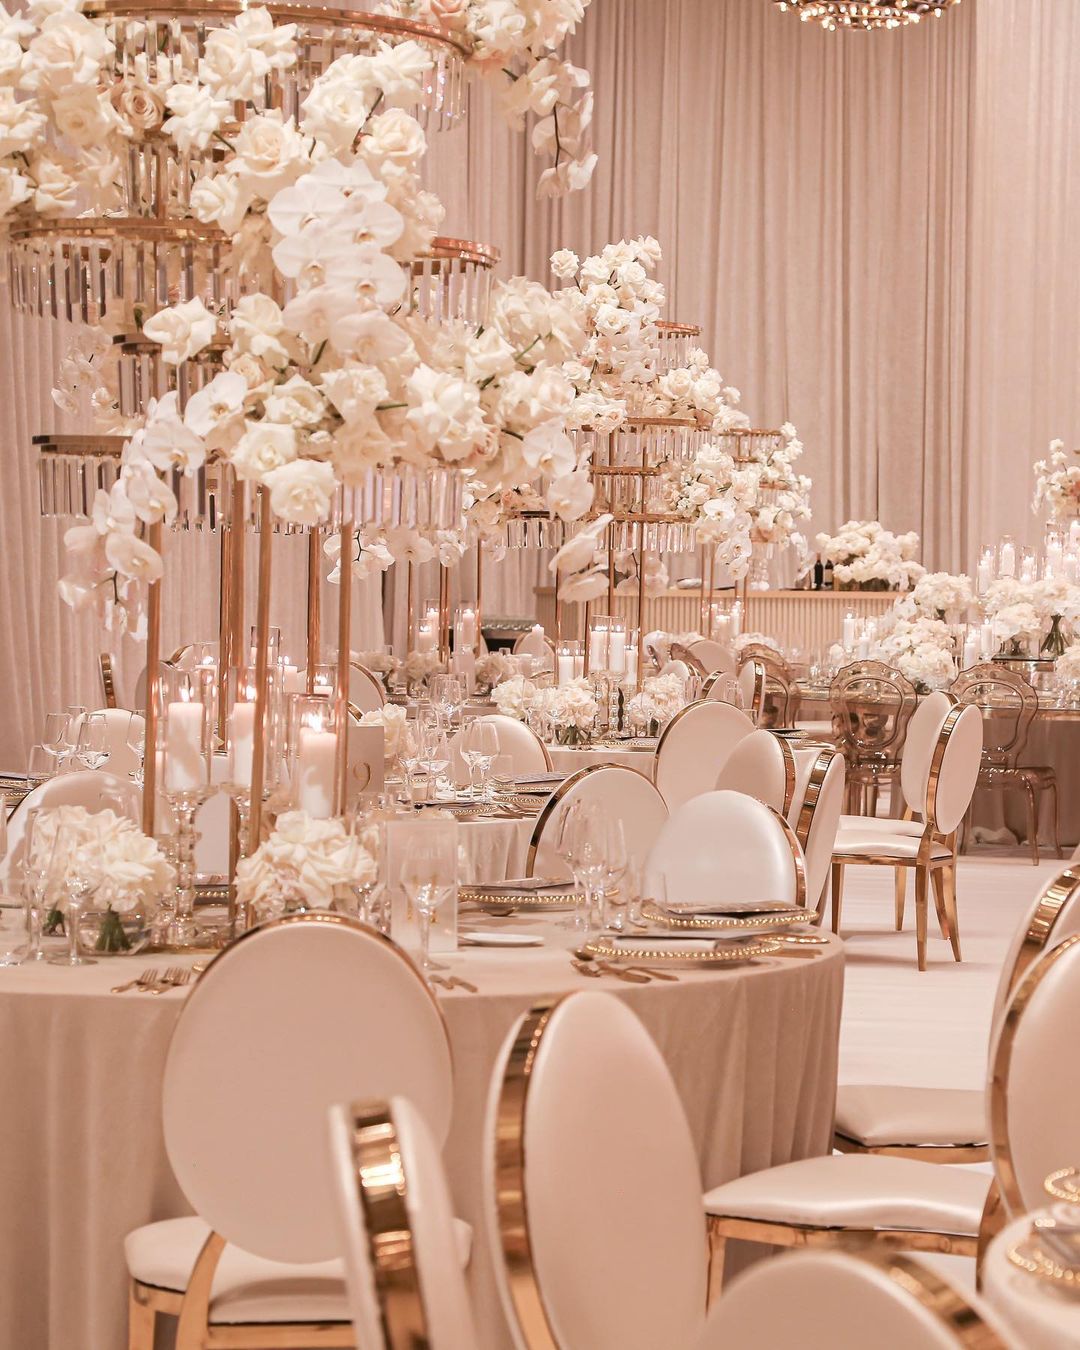 Diane Khoury uses her magic to bring the bride's ideas to life.